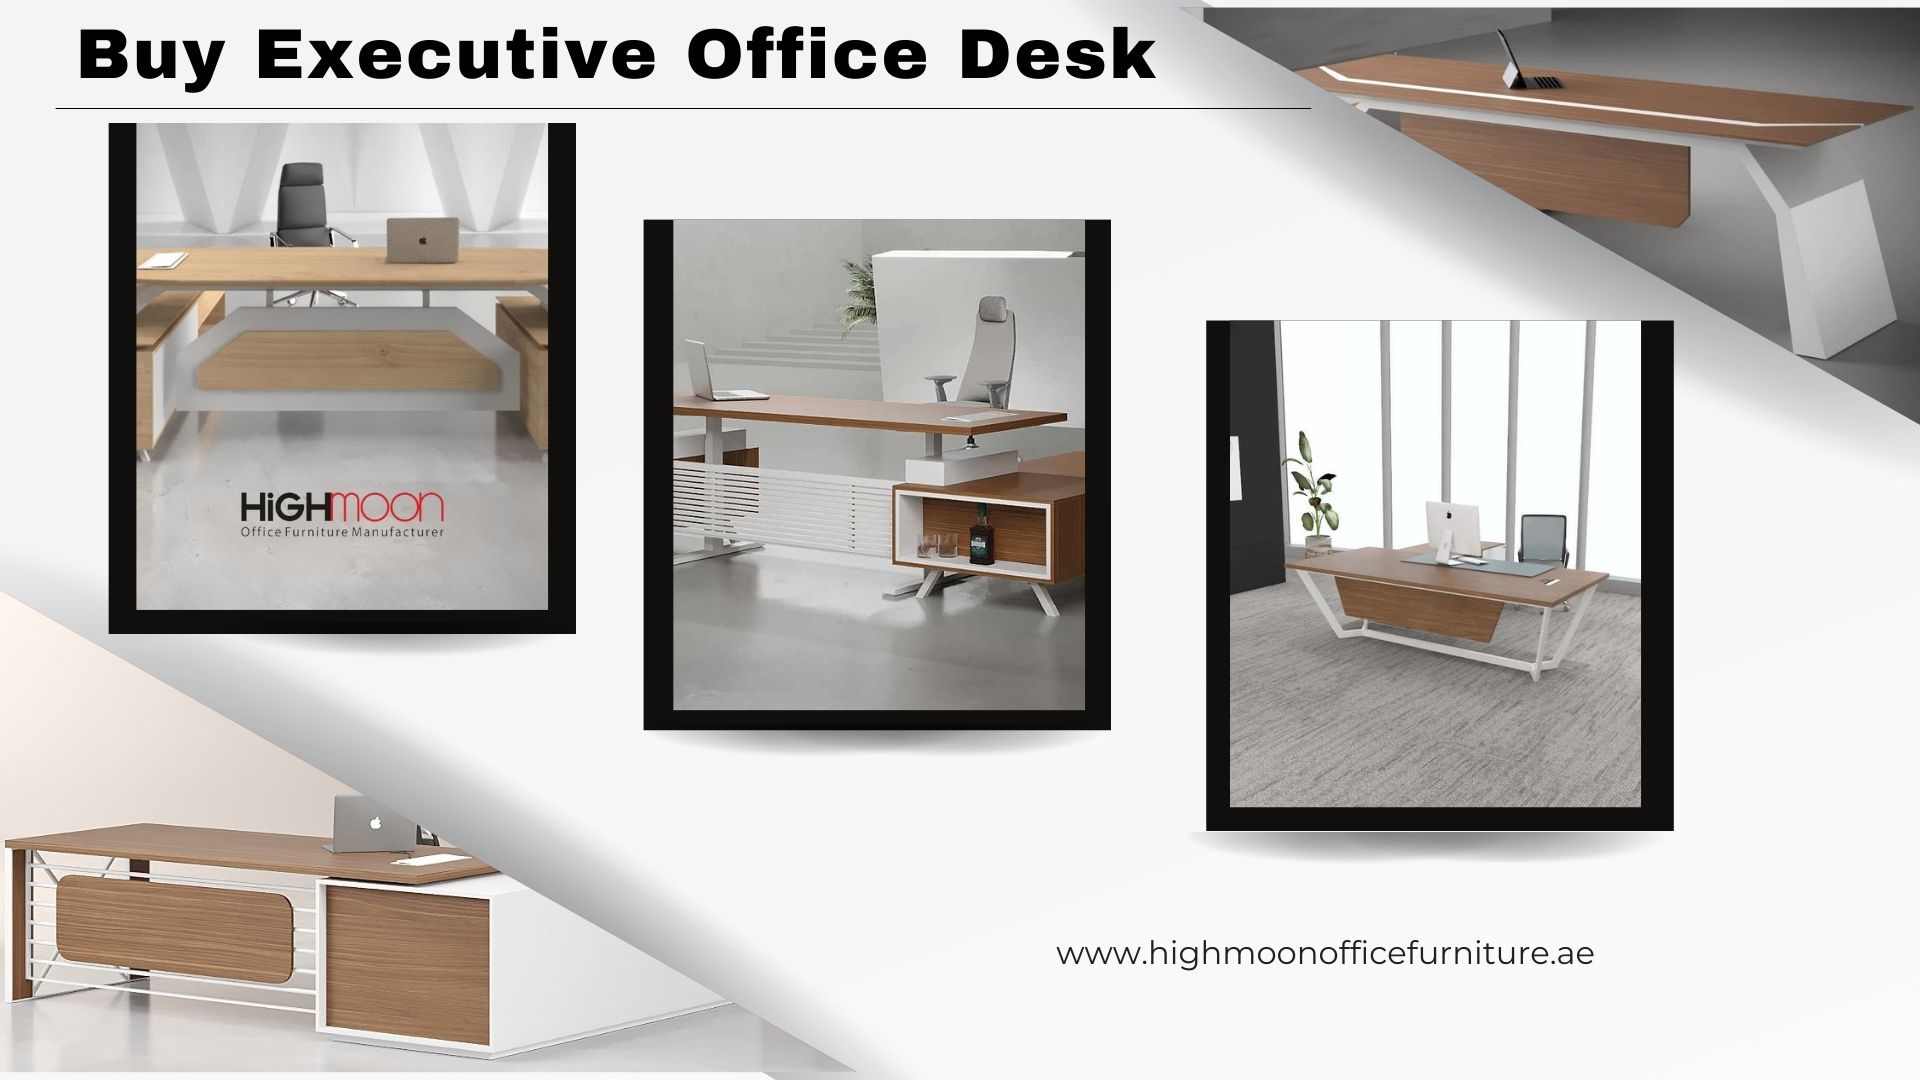 Buy Executive Office Desk from Highmoon at Best Price